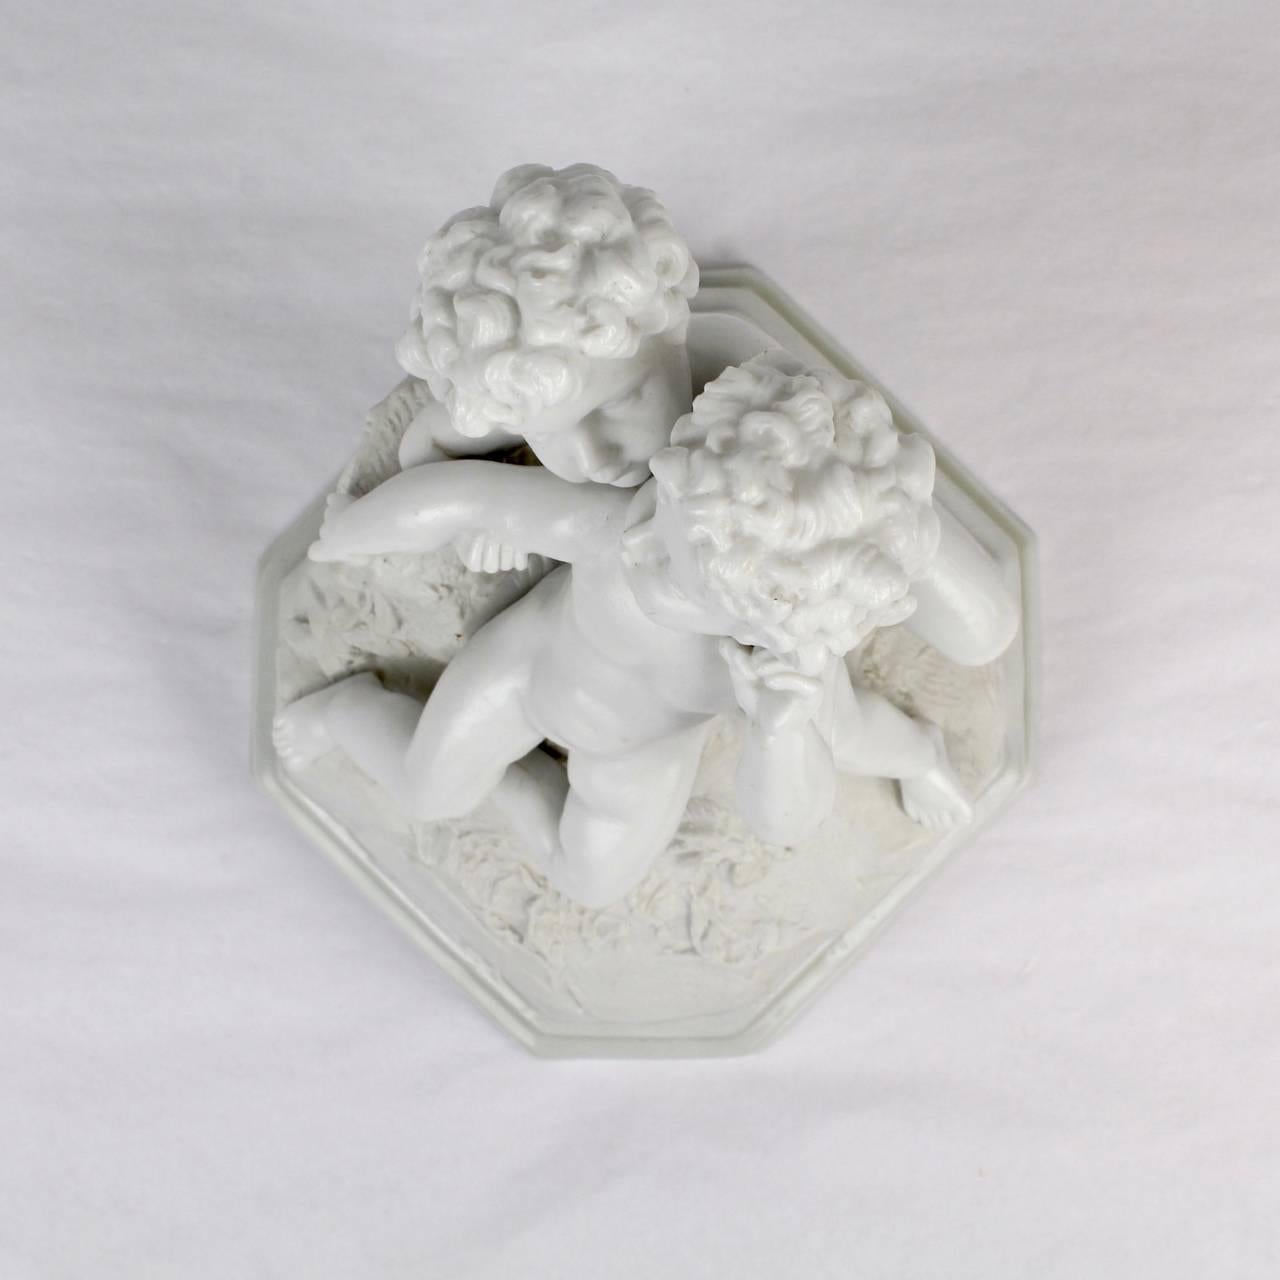 Antique 19th Century French Bisque Figurine of Two Putti in an Amorous Embrace For Sale 1